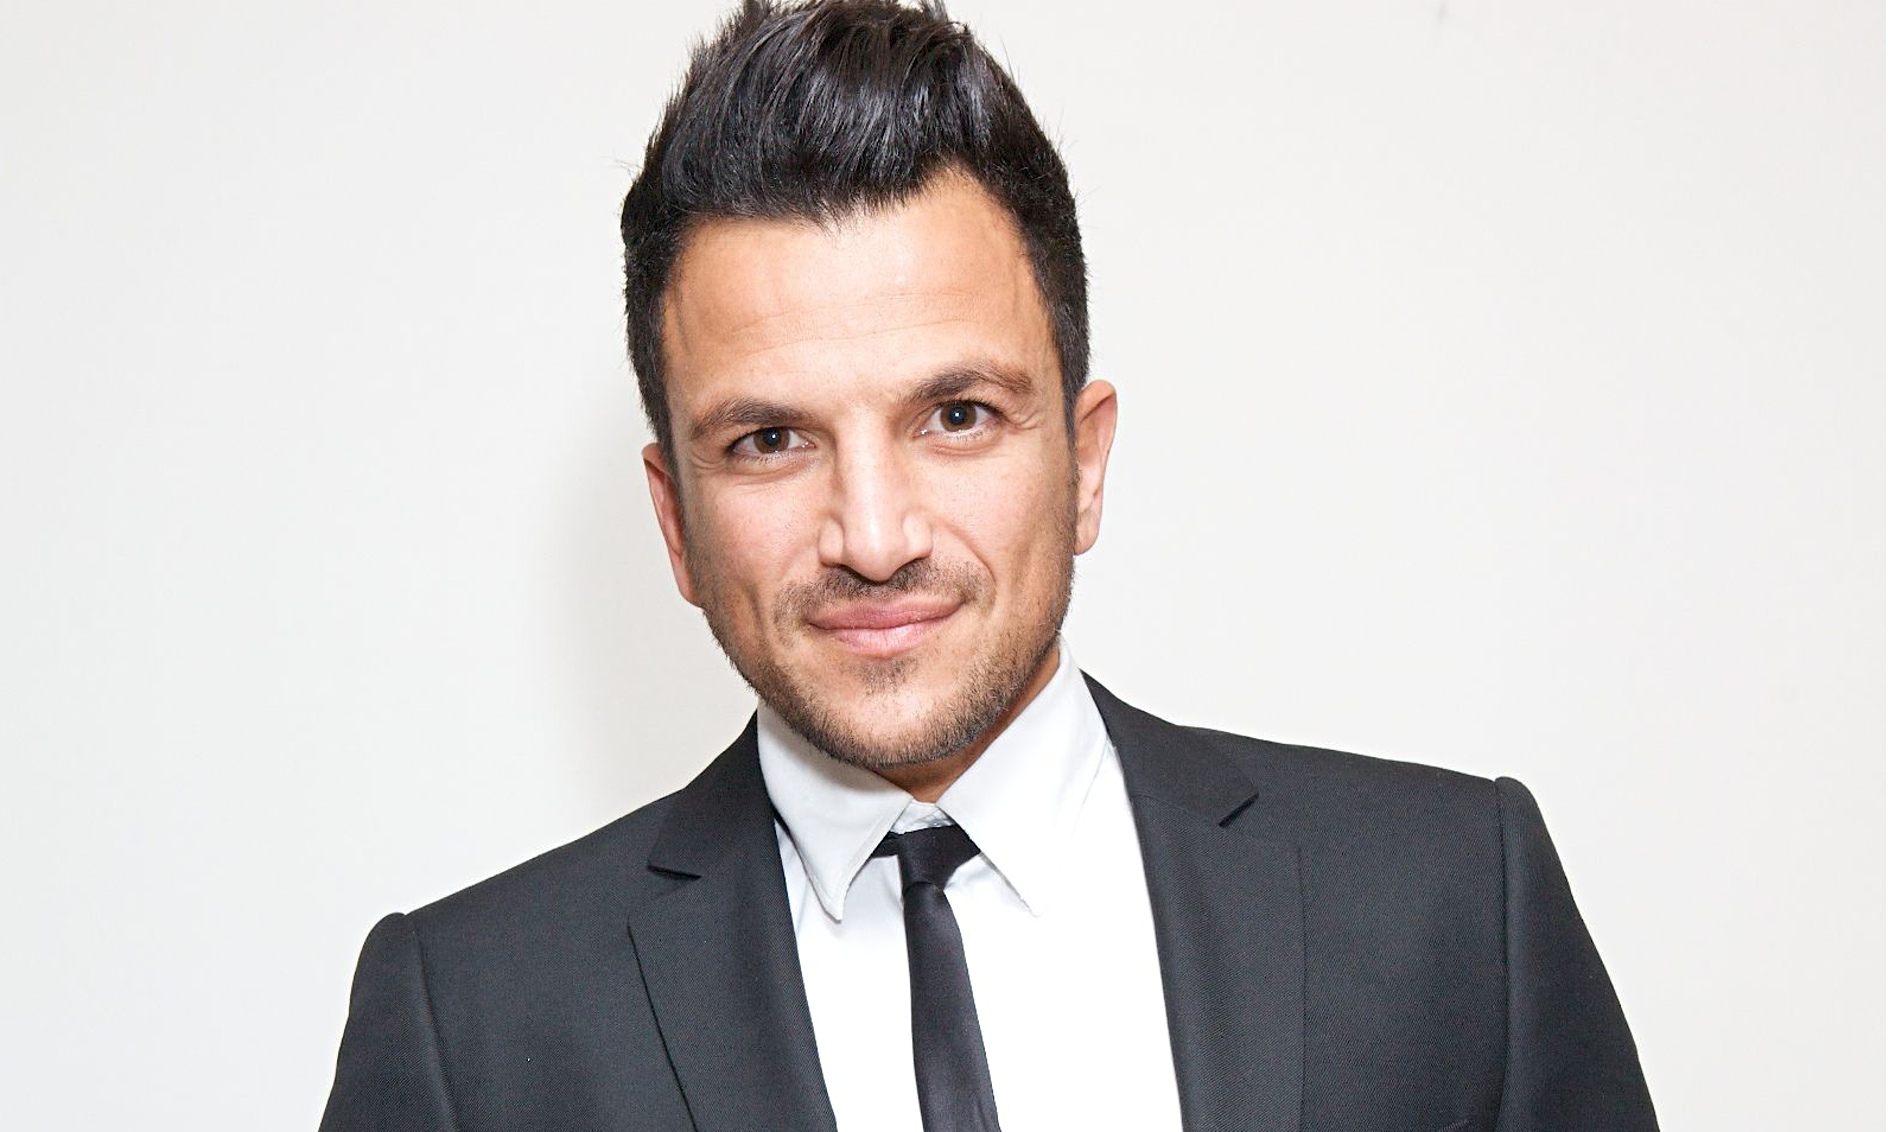 Peter Andre: My family values | Life and style | The Guardian